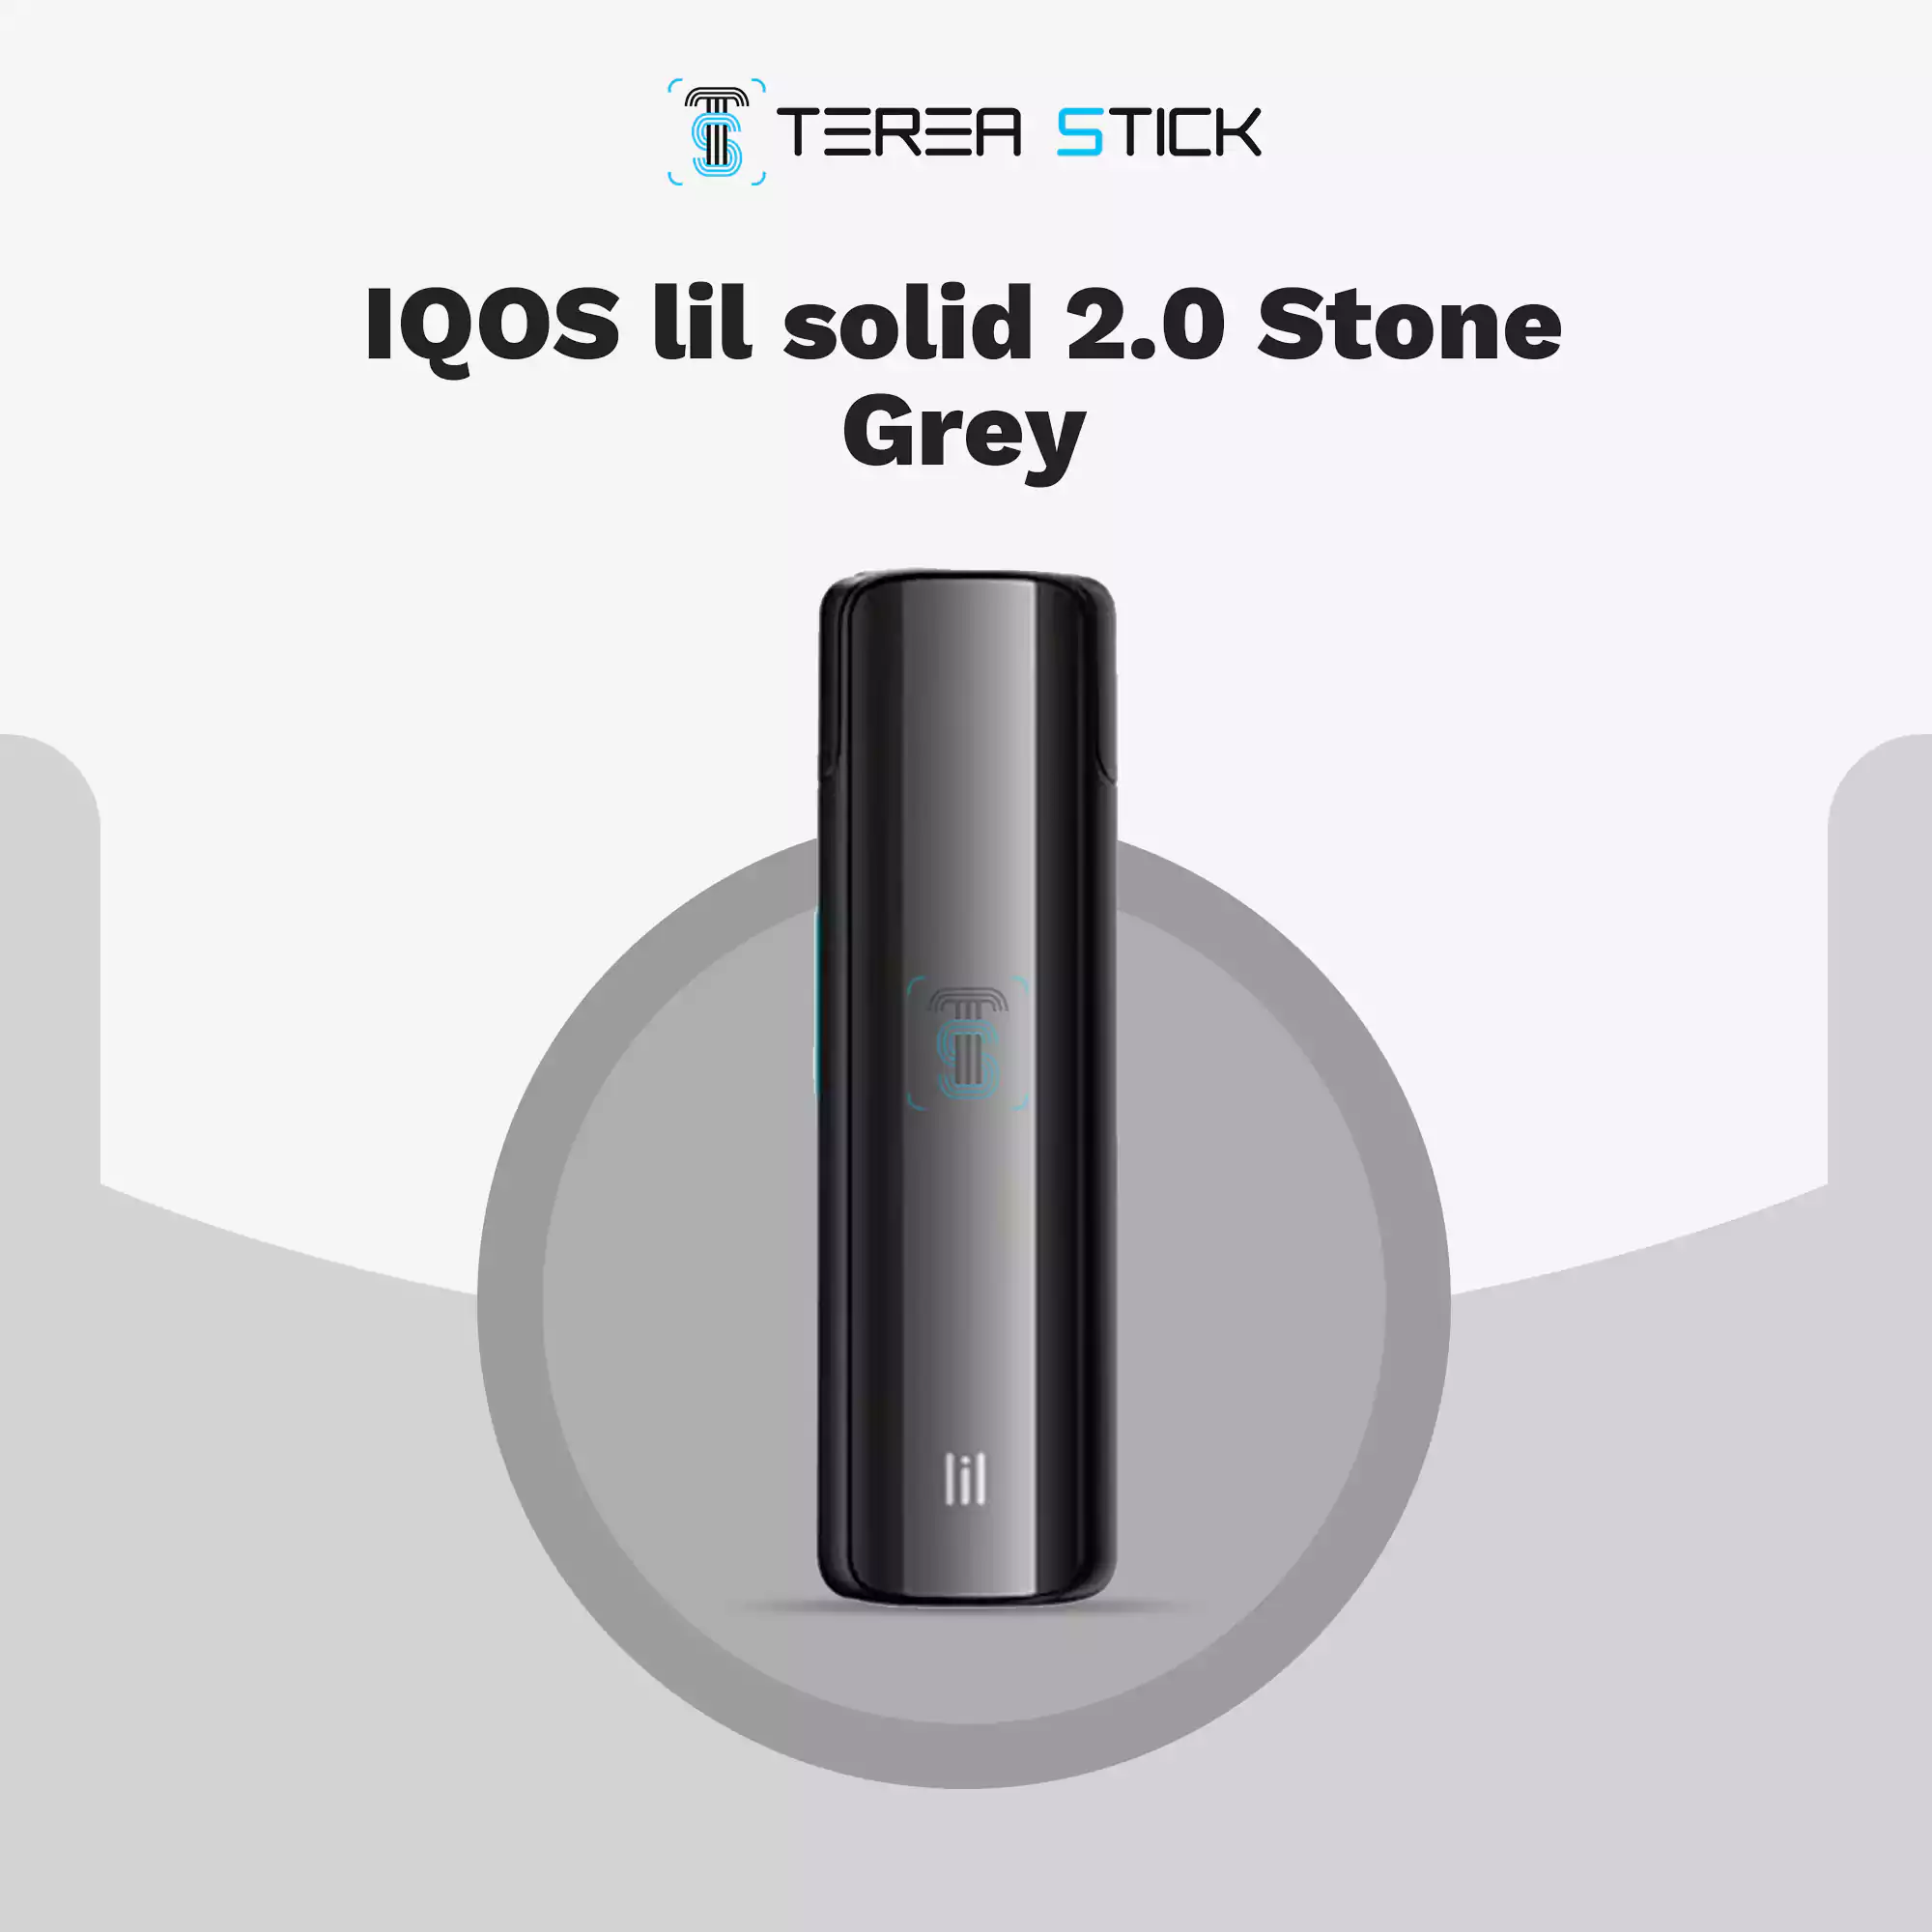 IQOS Terea Indonesian: The Sophisticated and Smokeless Vaping